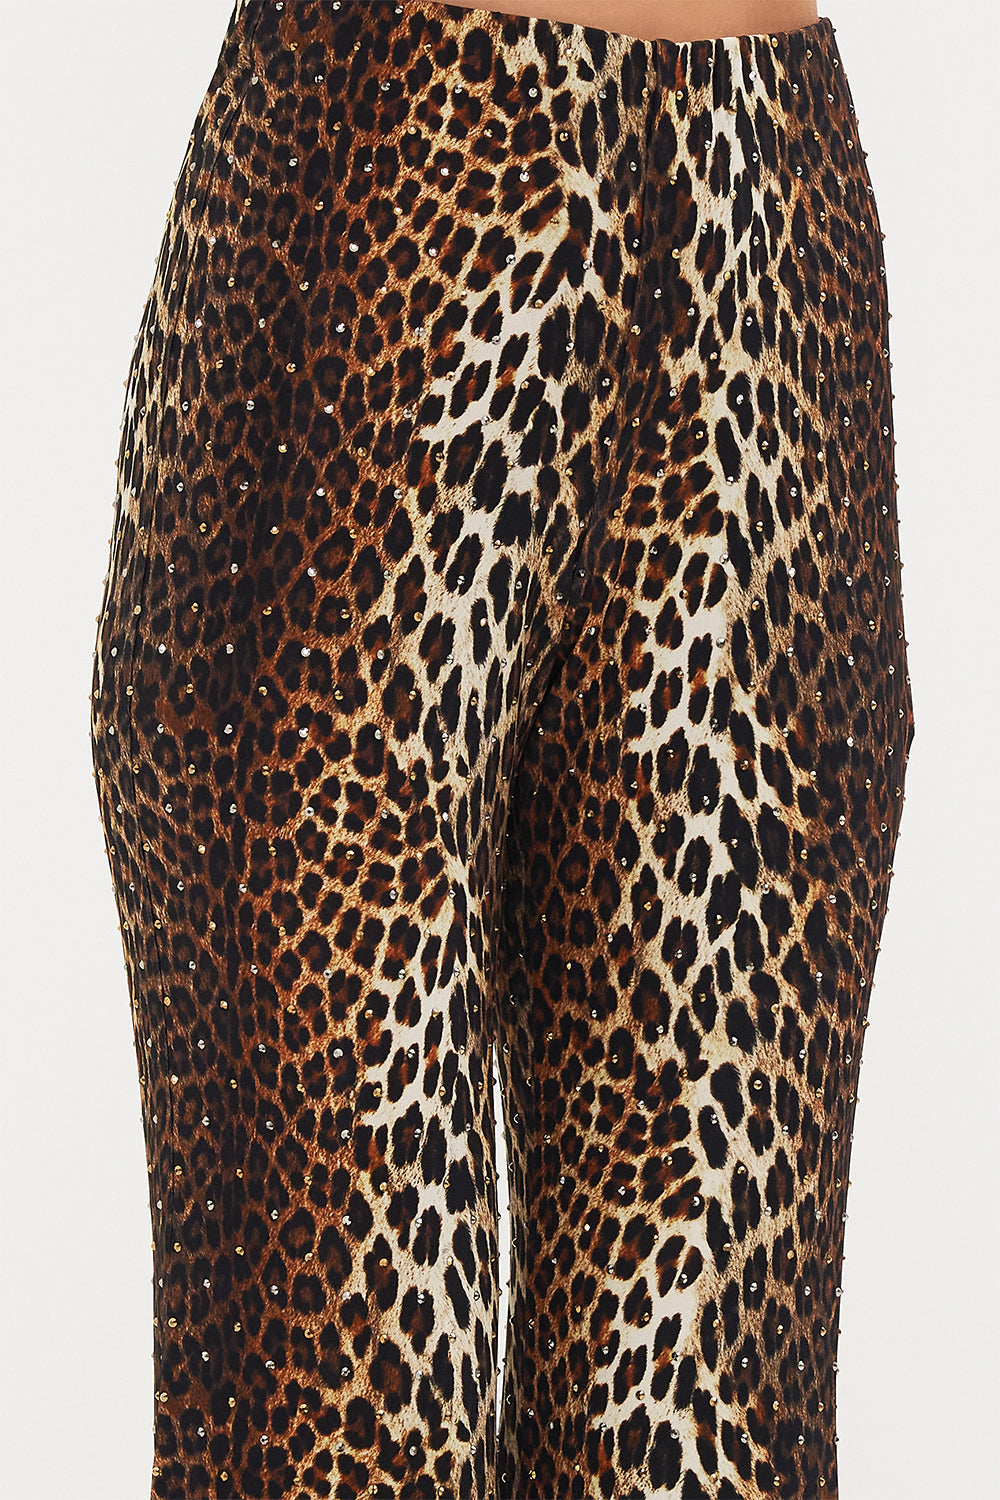 CAMILLA leopard jersey flare pant in Amsterglam print.